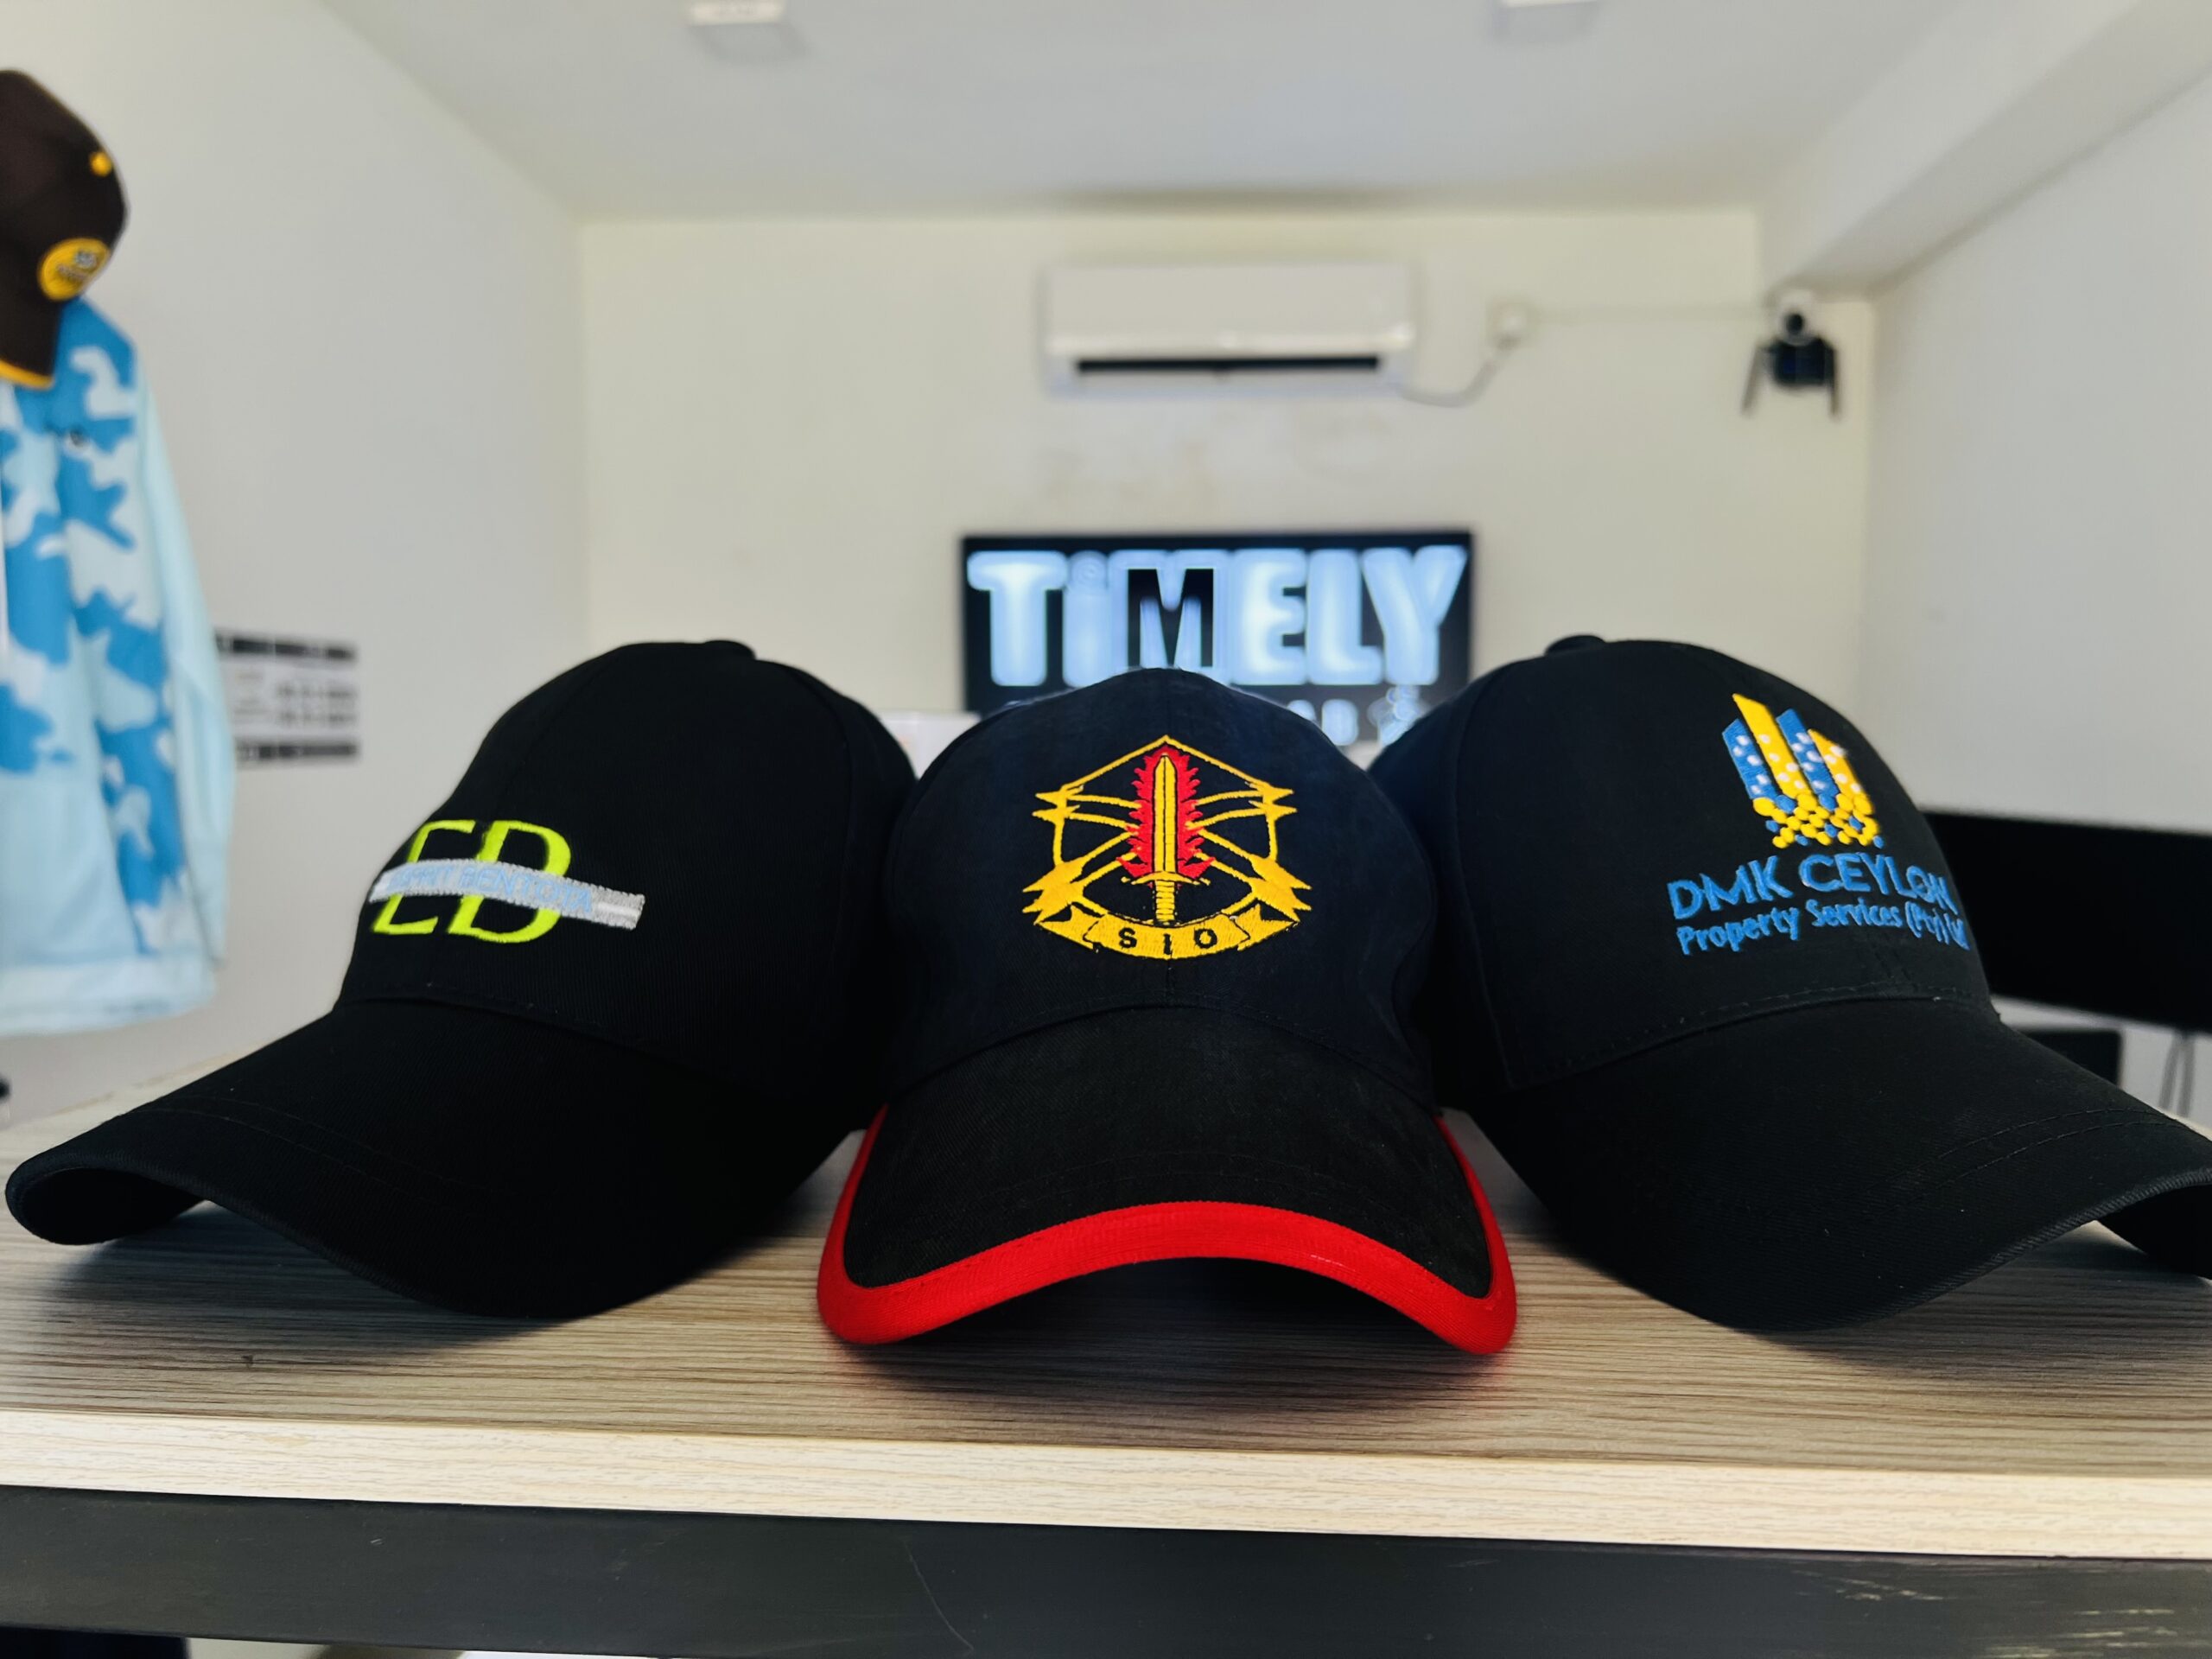 cap-printing-in-colombo-cap-printing-near-me-timely-designlab